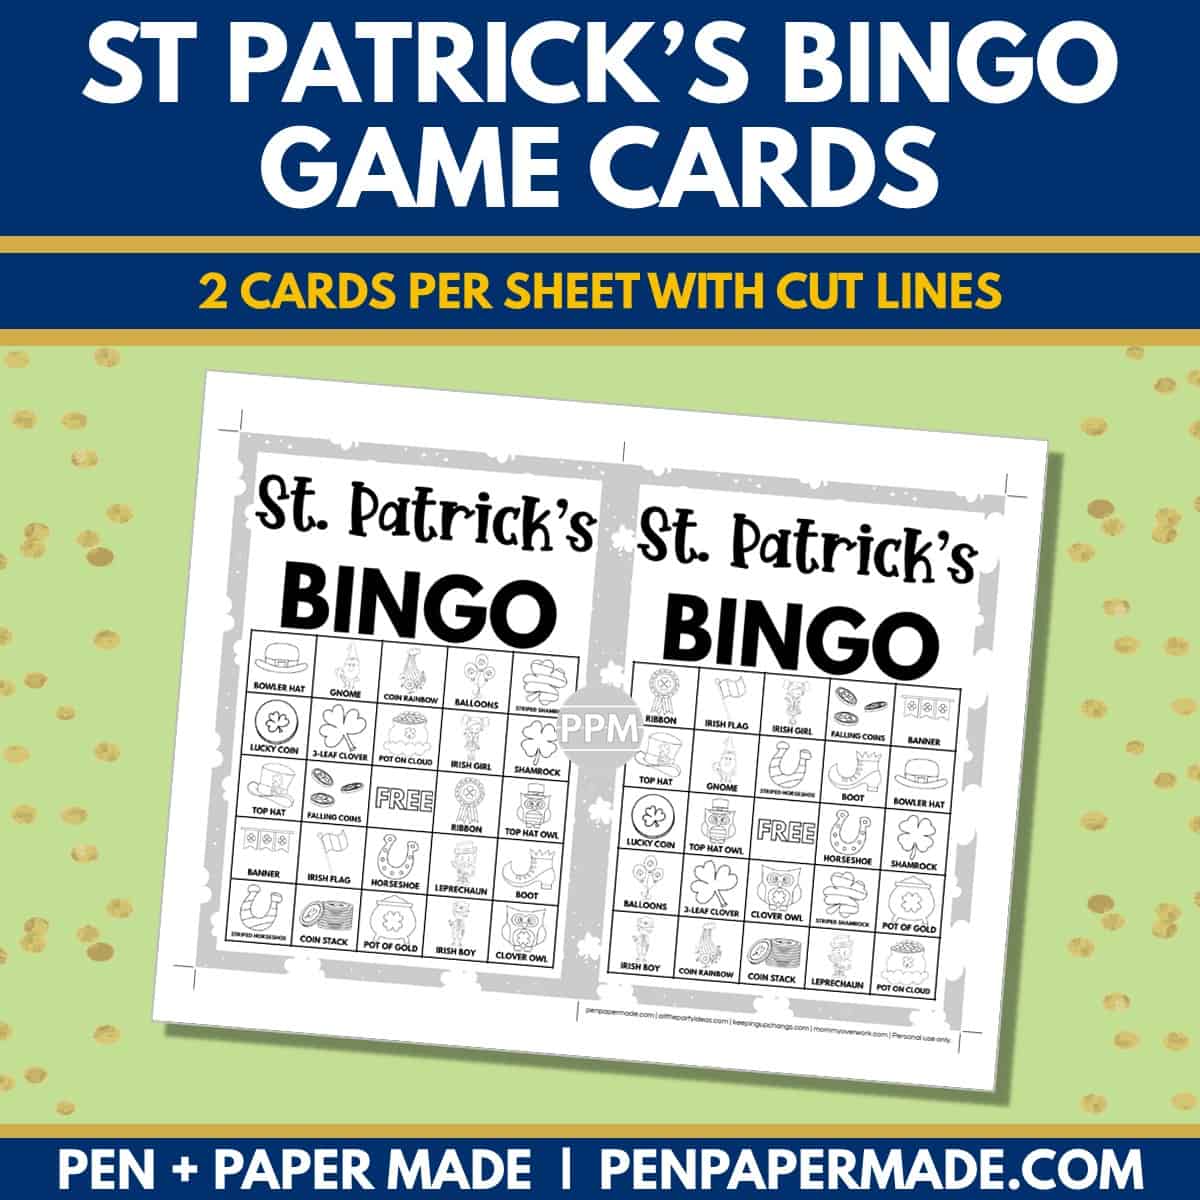 st. patrick's day bingo card 5x5 5x7 game boards with black white images and text words for coloring.